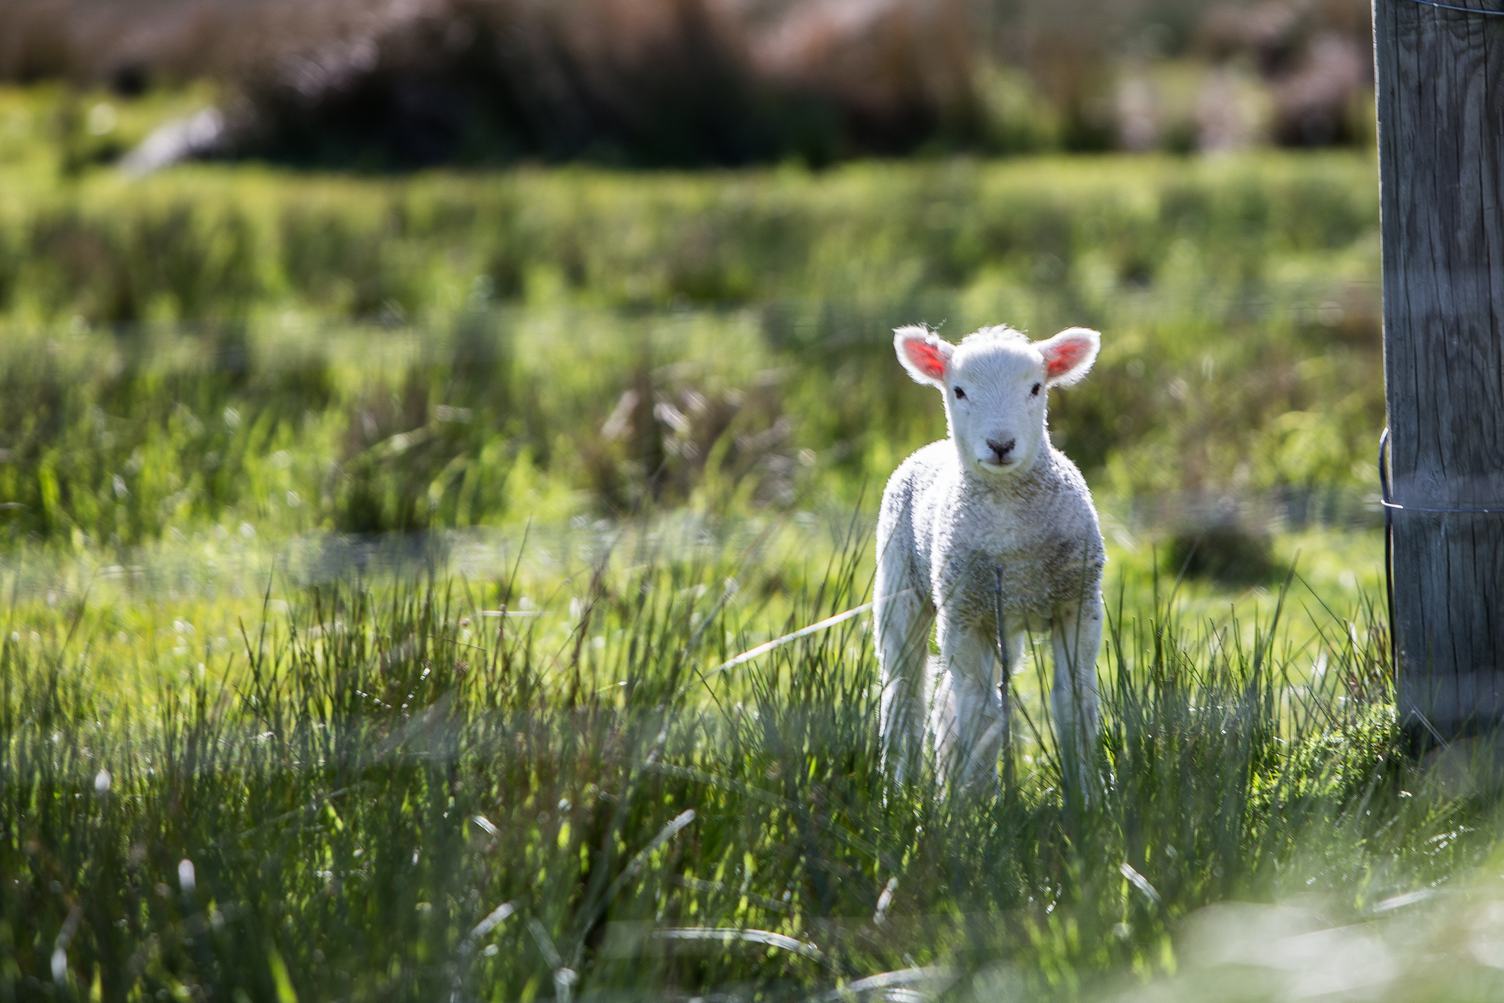 A Baby Lamb during Spring Grazing in a Sheep Farm